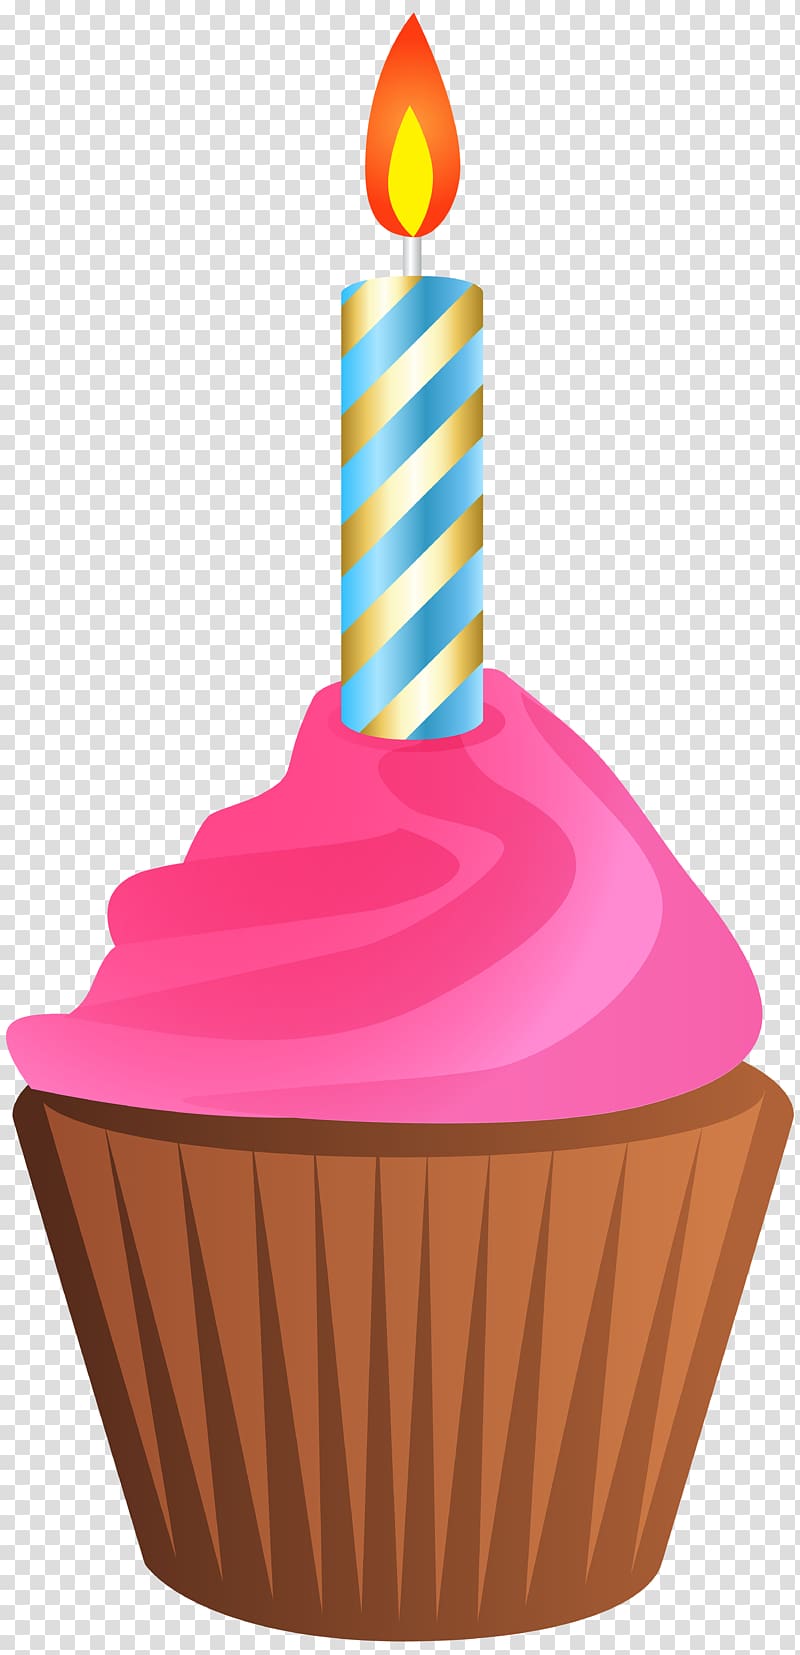 pink cupcake with candle , Muffin Birthday cake Cupcake , Birthday Muffin with Candle transparent background PNG clipart